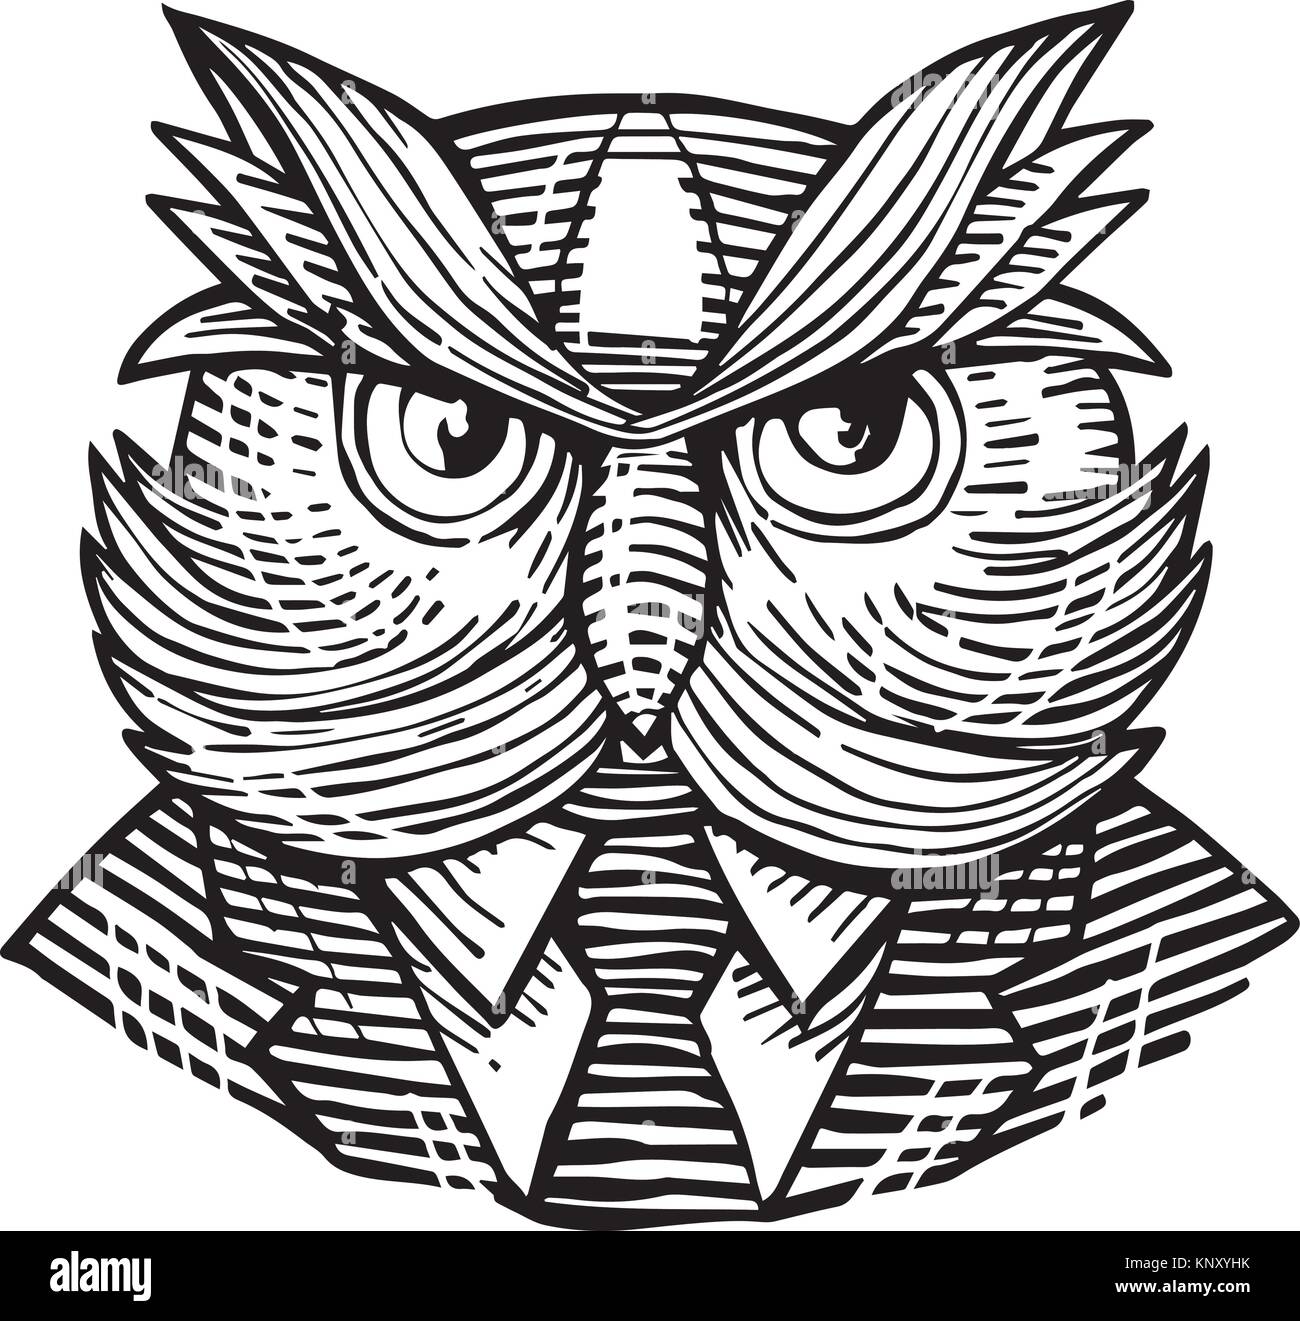 Retro woodcut style illustration of a hip or hipster wise owl with moustache wearing suit and tie viewed from front done in black and white. Stock Vector